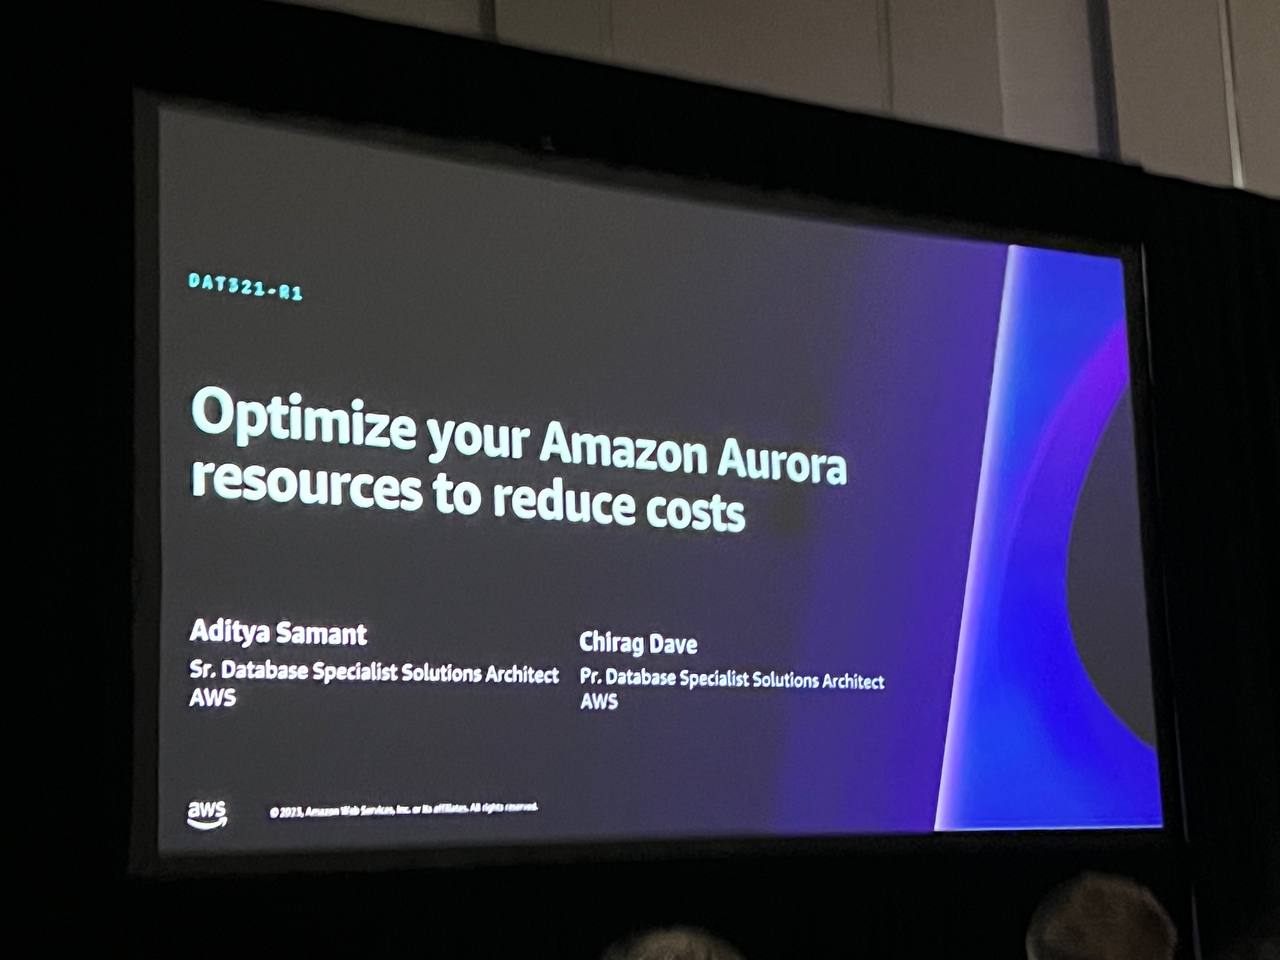 Optimize your Amazon Aurora resources to reduce costs